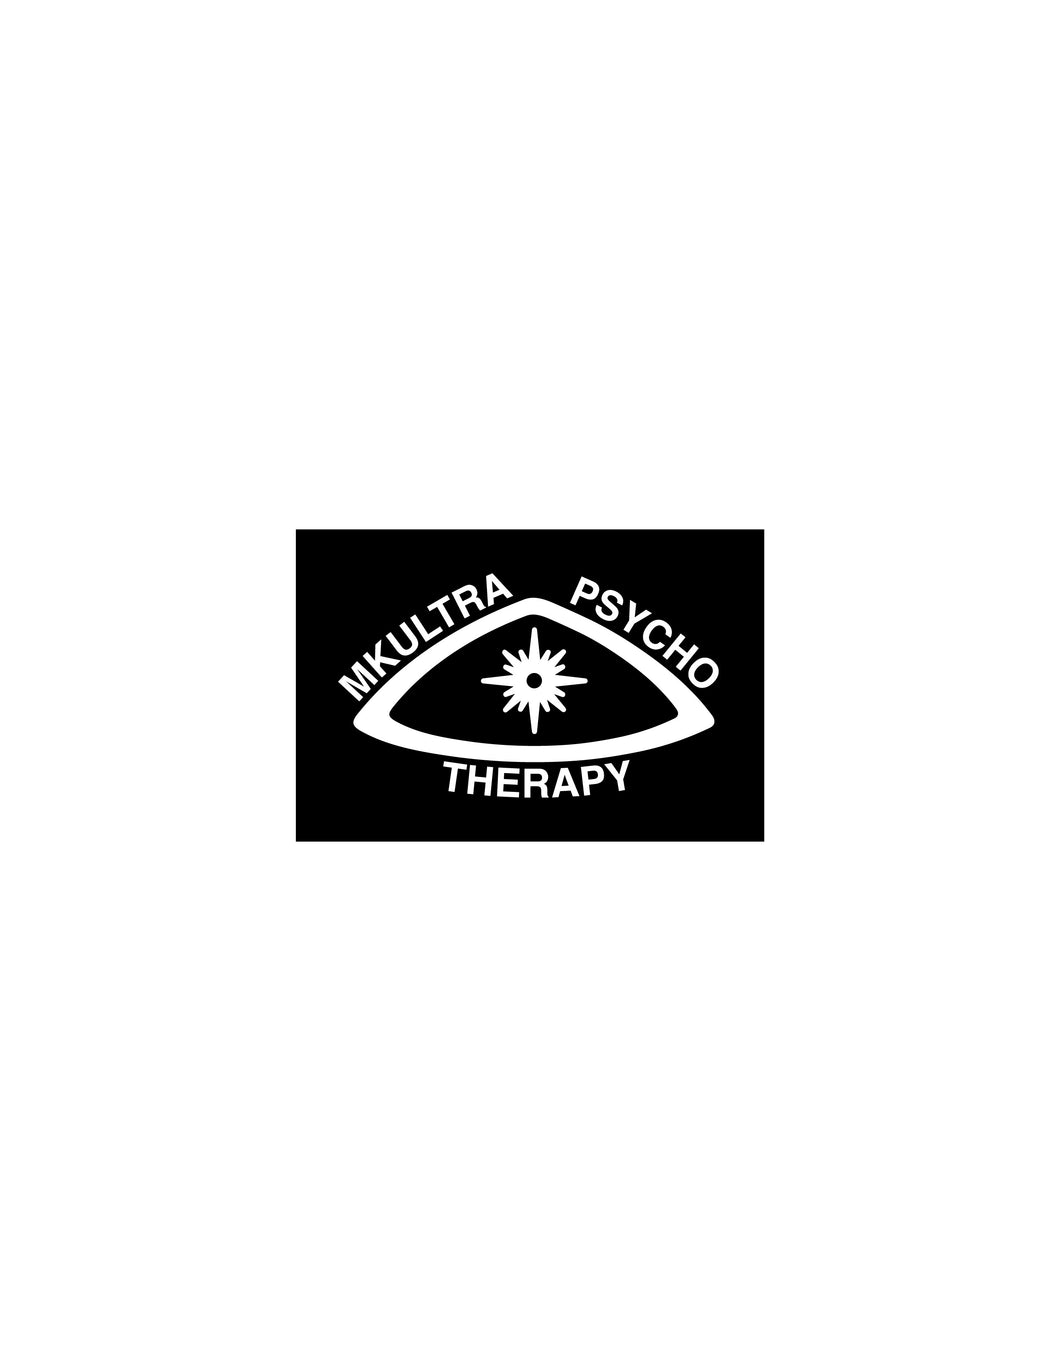 MKULTRA PSYCHO THERAPY STICKERS